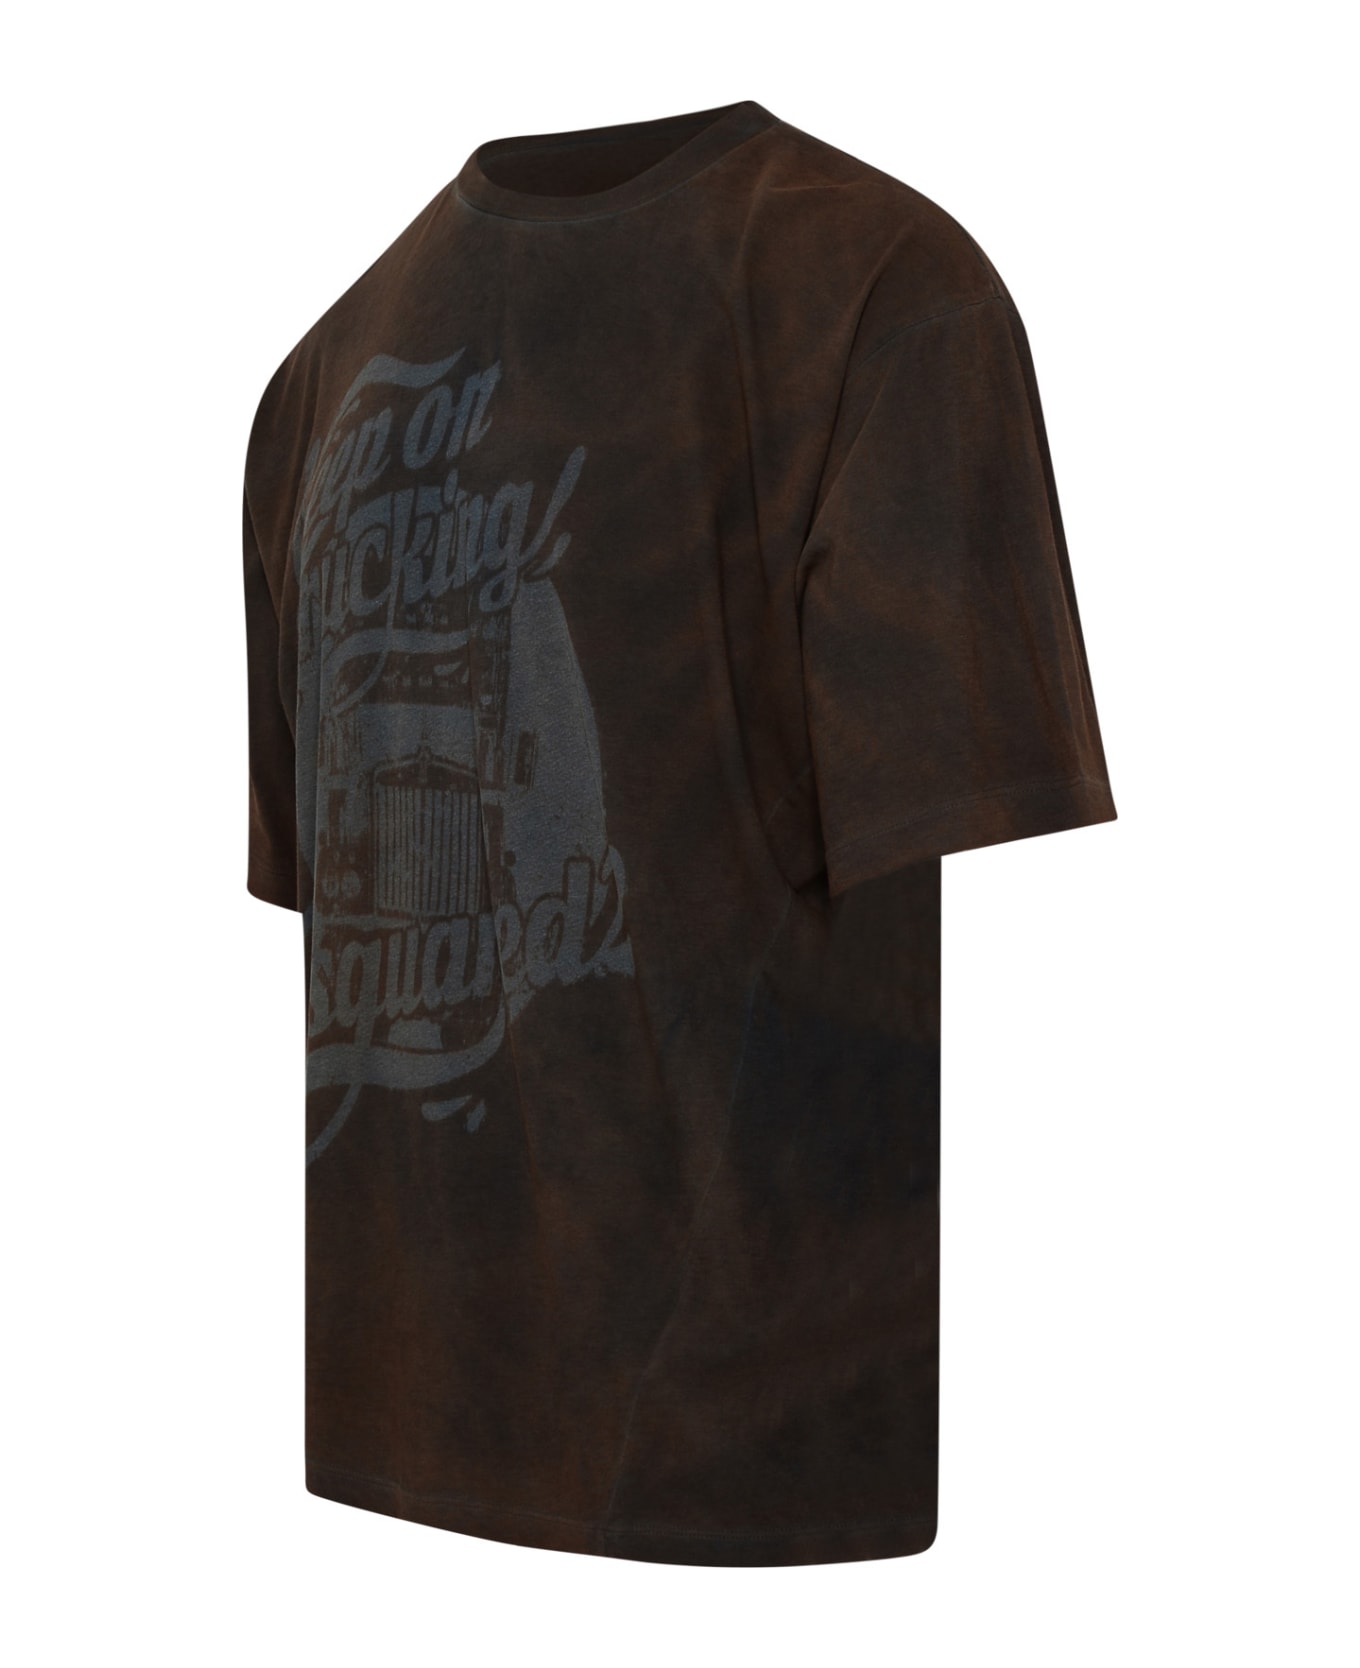 Dsquared2 Brown Cotton T-shirt - Brown シャツ